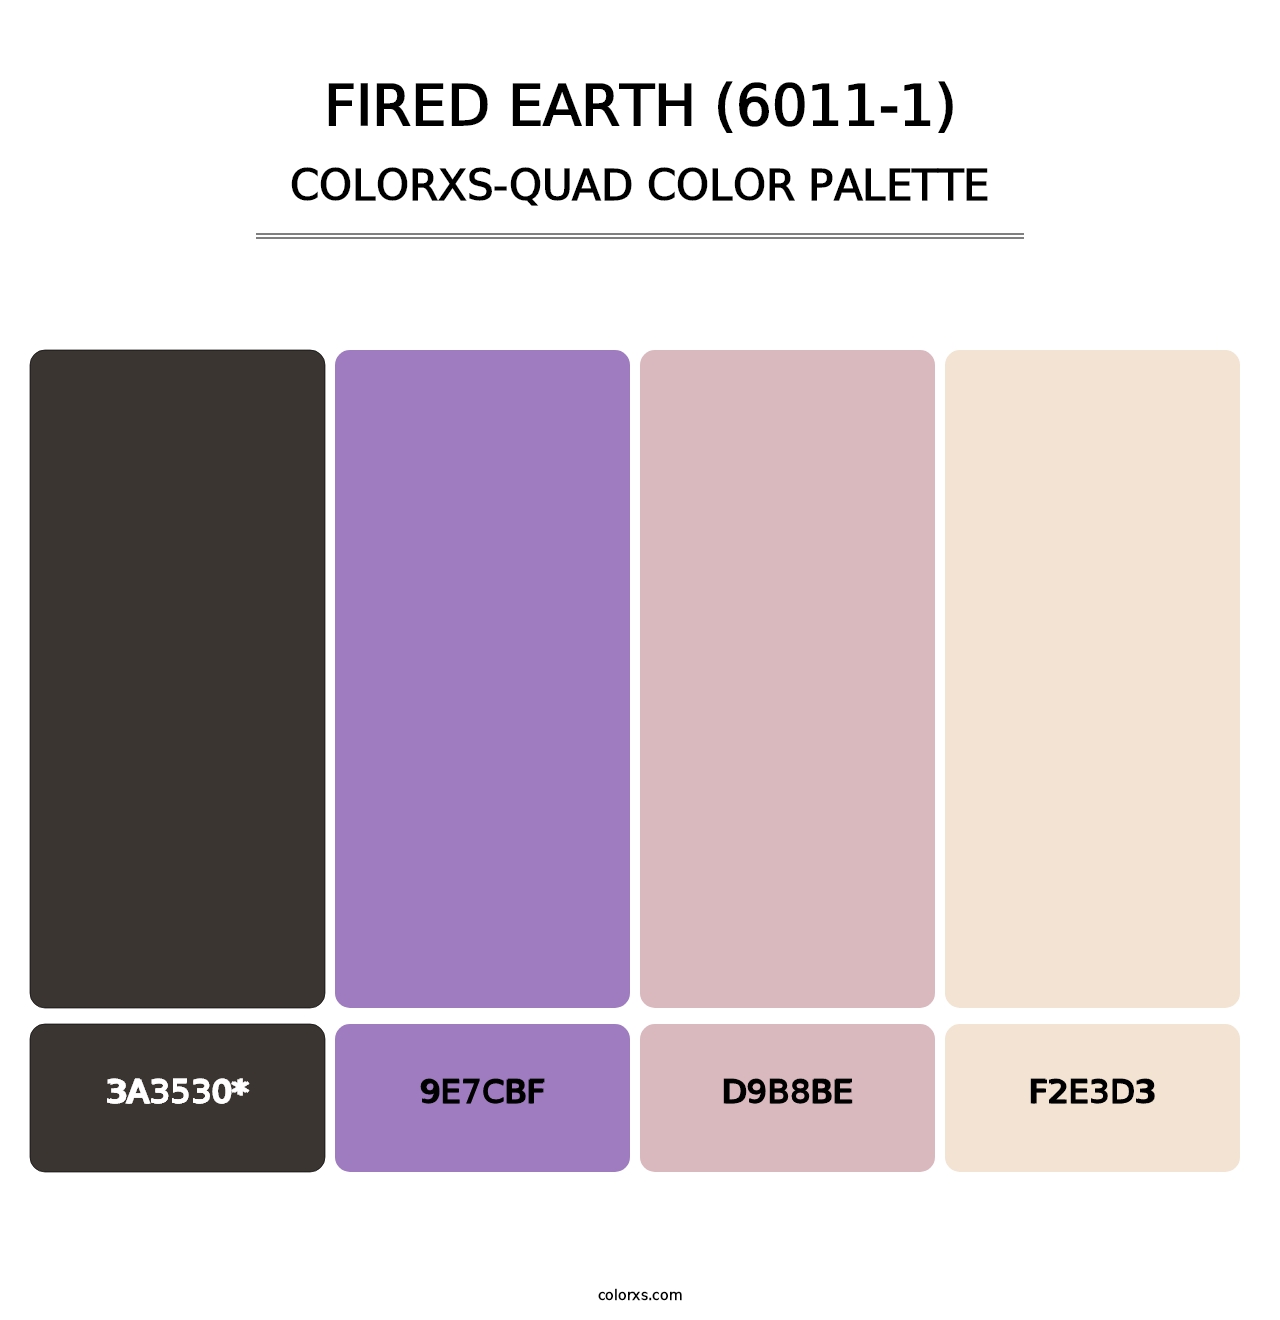 Fired Earth (6011-1) - Colorxs Quad Palette